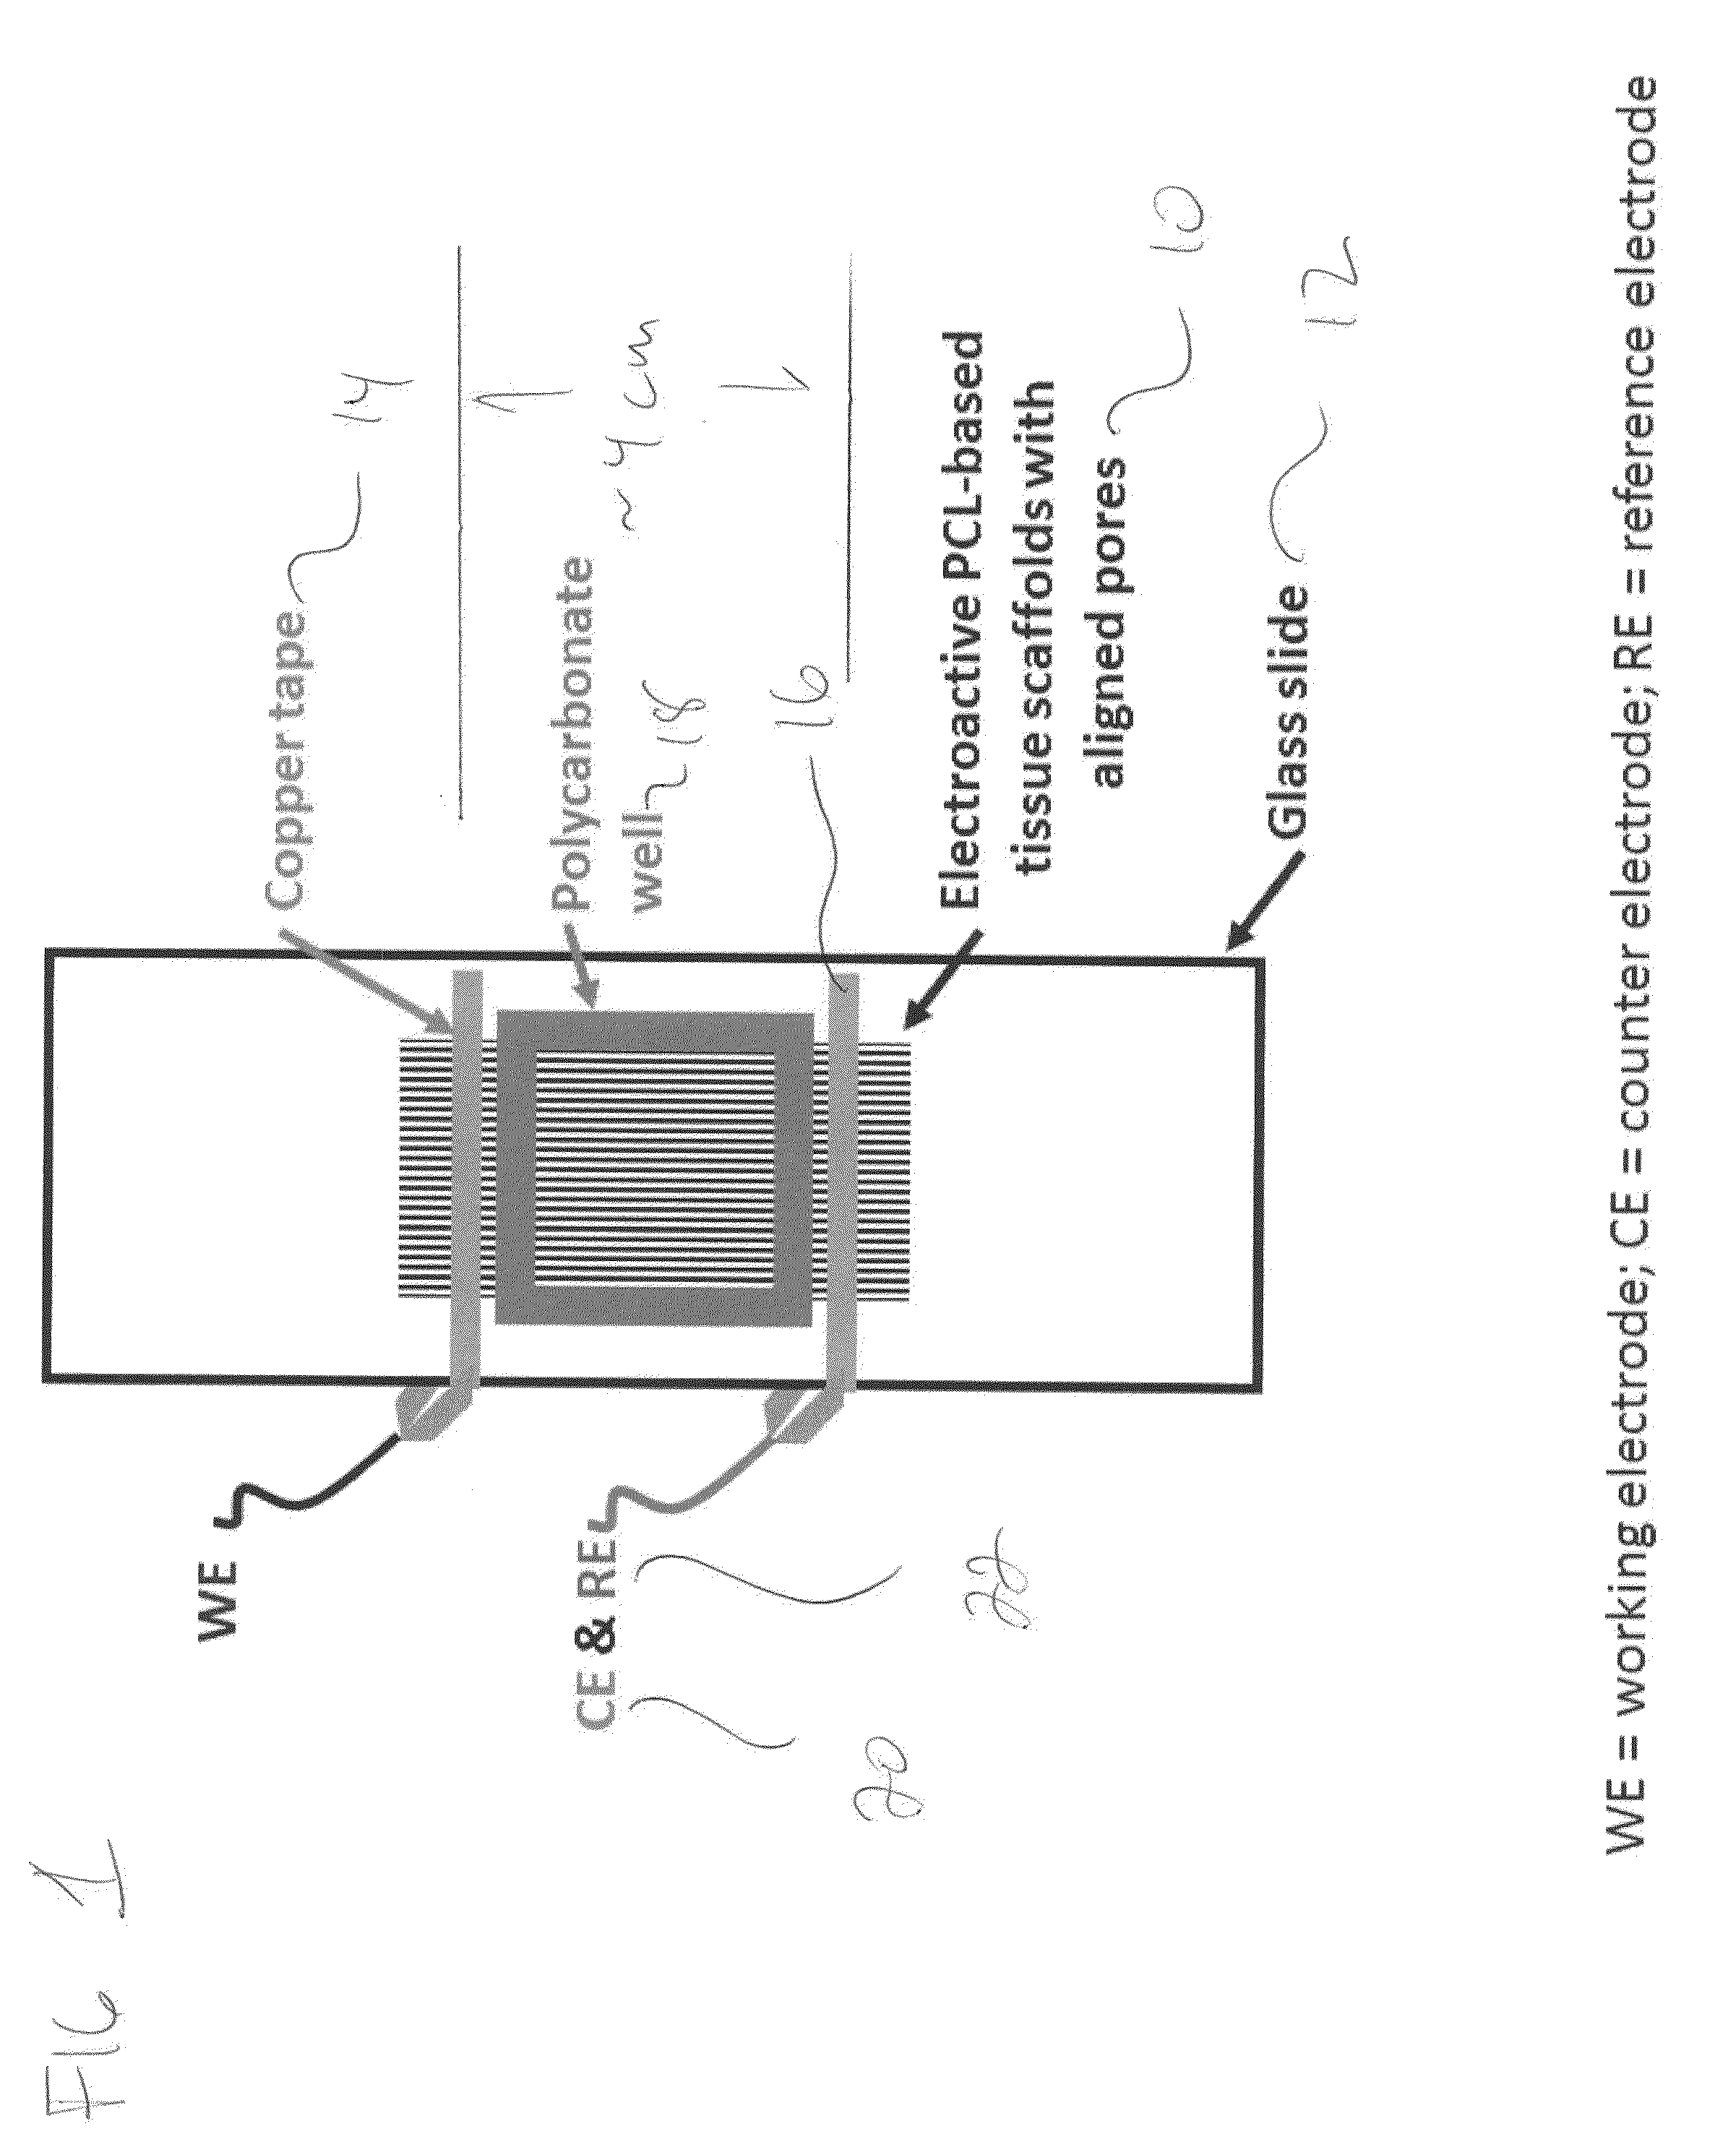 Electroactive polymeric scaffolds and method for delivering nerve growth factor to nerve tissue